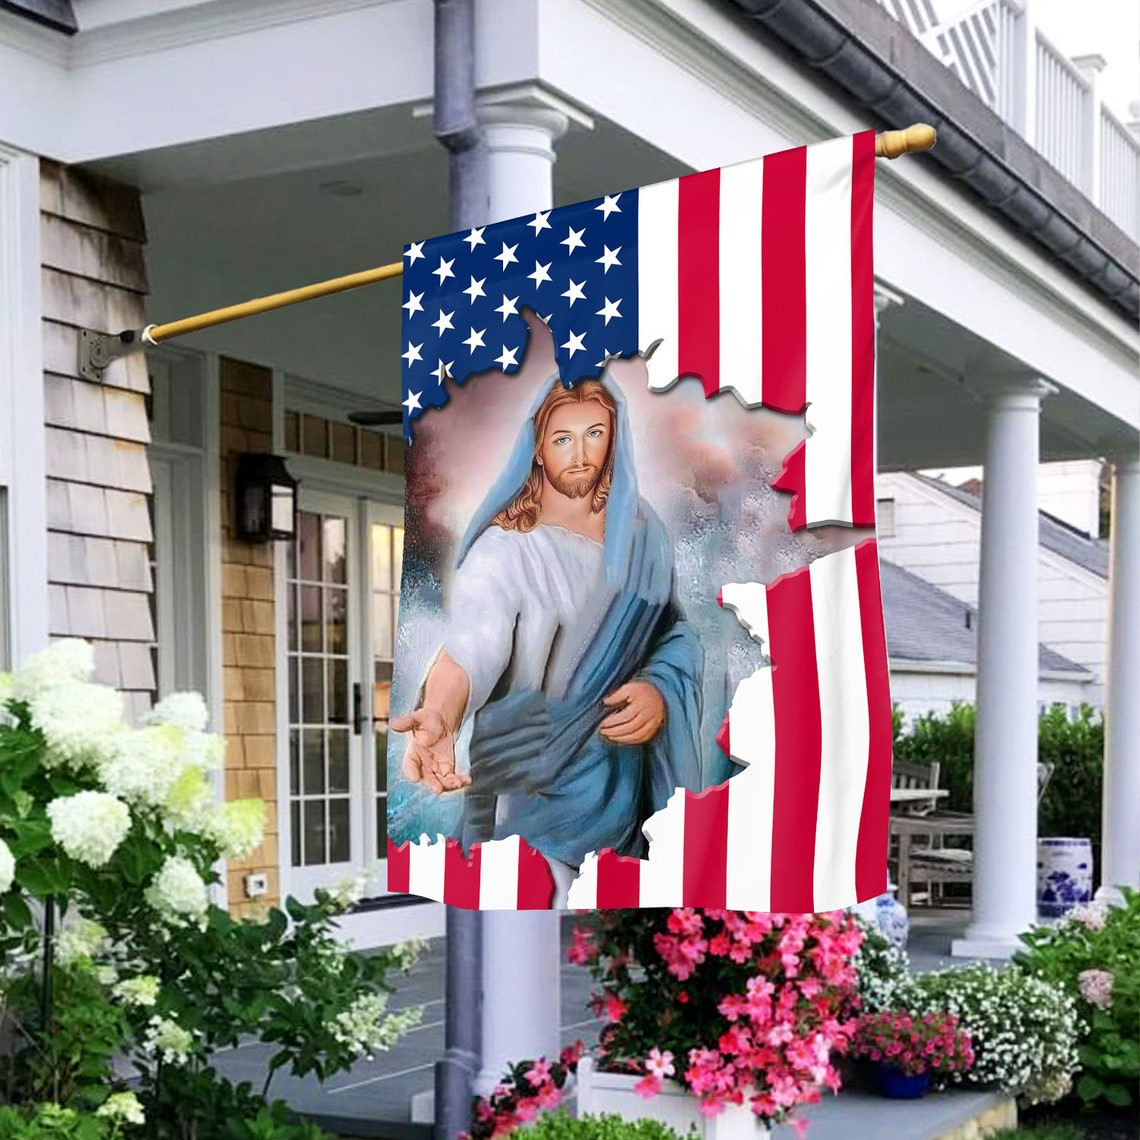 Jesus Independence Day Flag 4th Of July Flag Fourth July Flag USA Independence Day Proud Nation Flags god give his hand